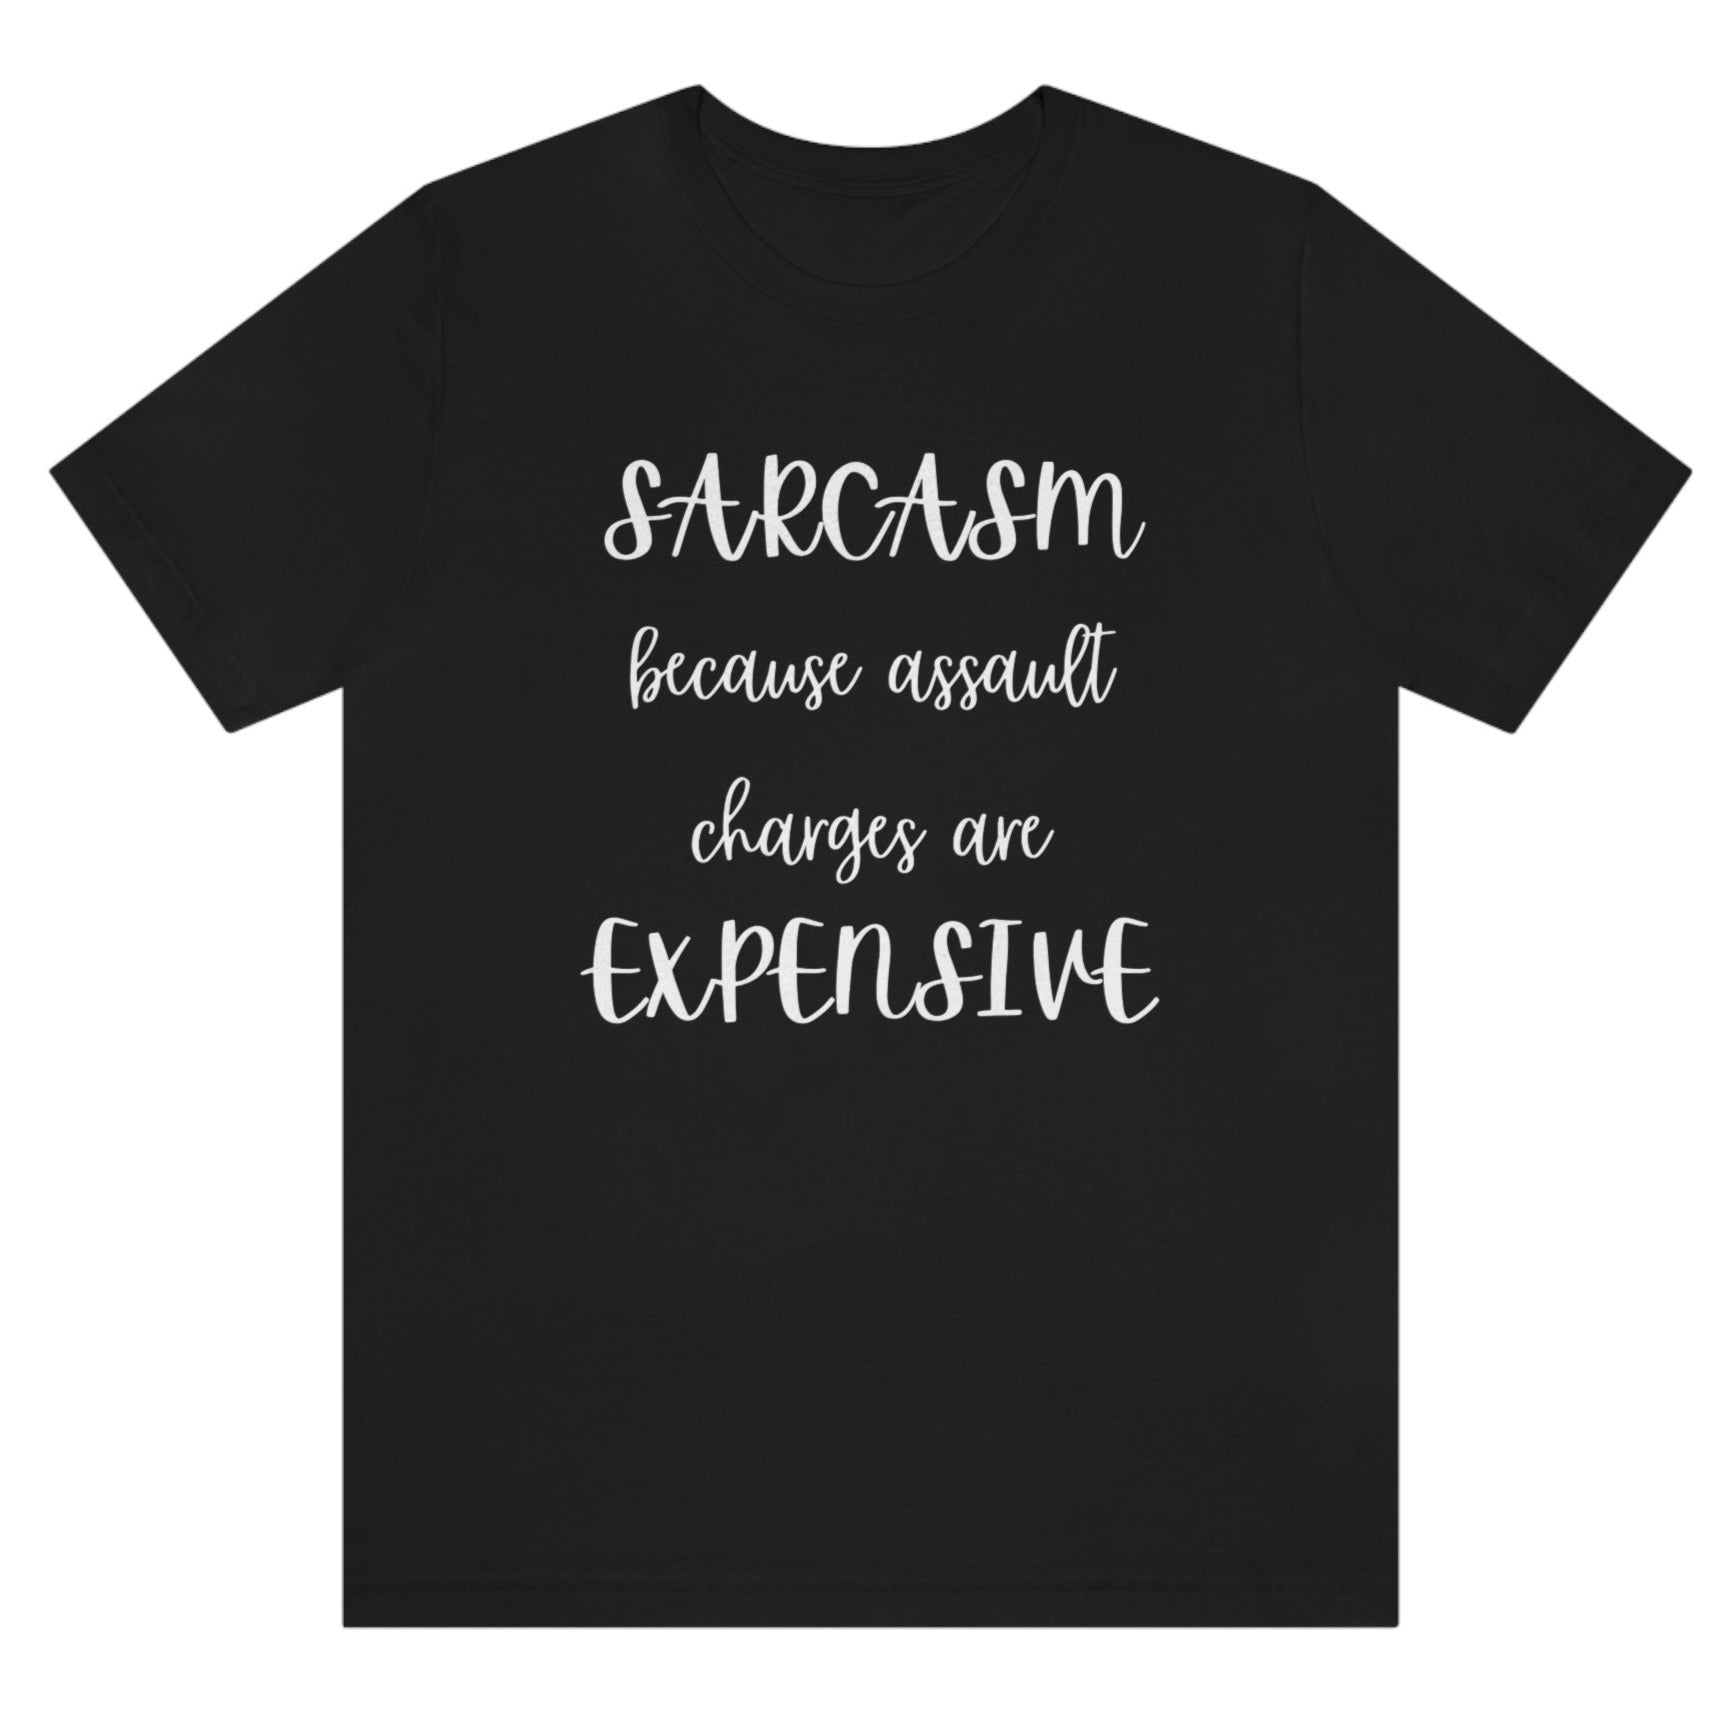 sarcasm-because-assault-charges-are-expensive-black-t-shirt-women-funny-sarcastic